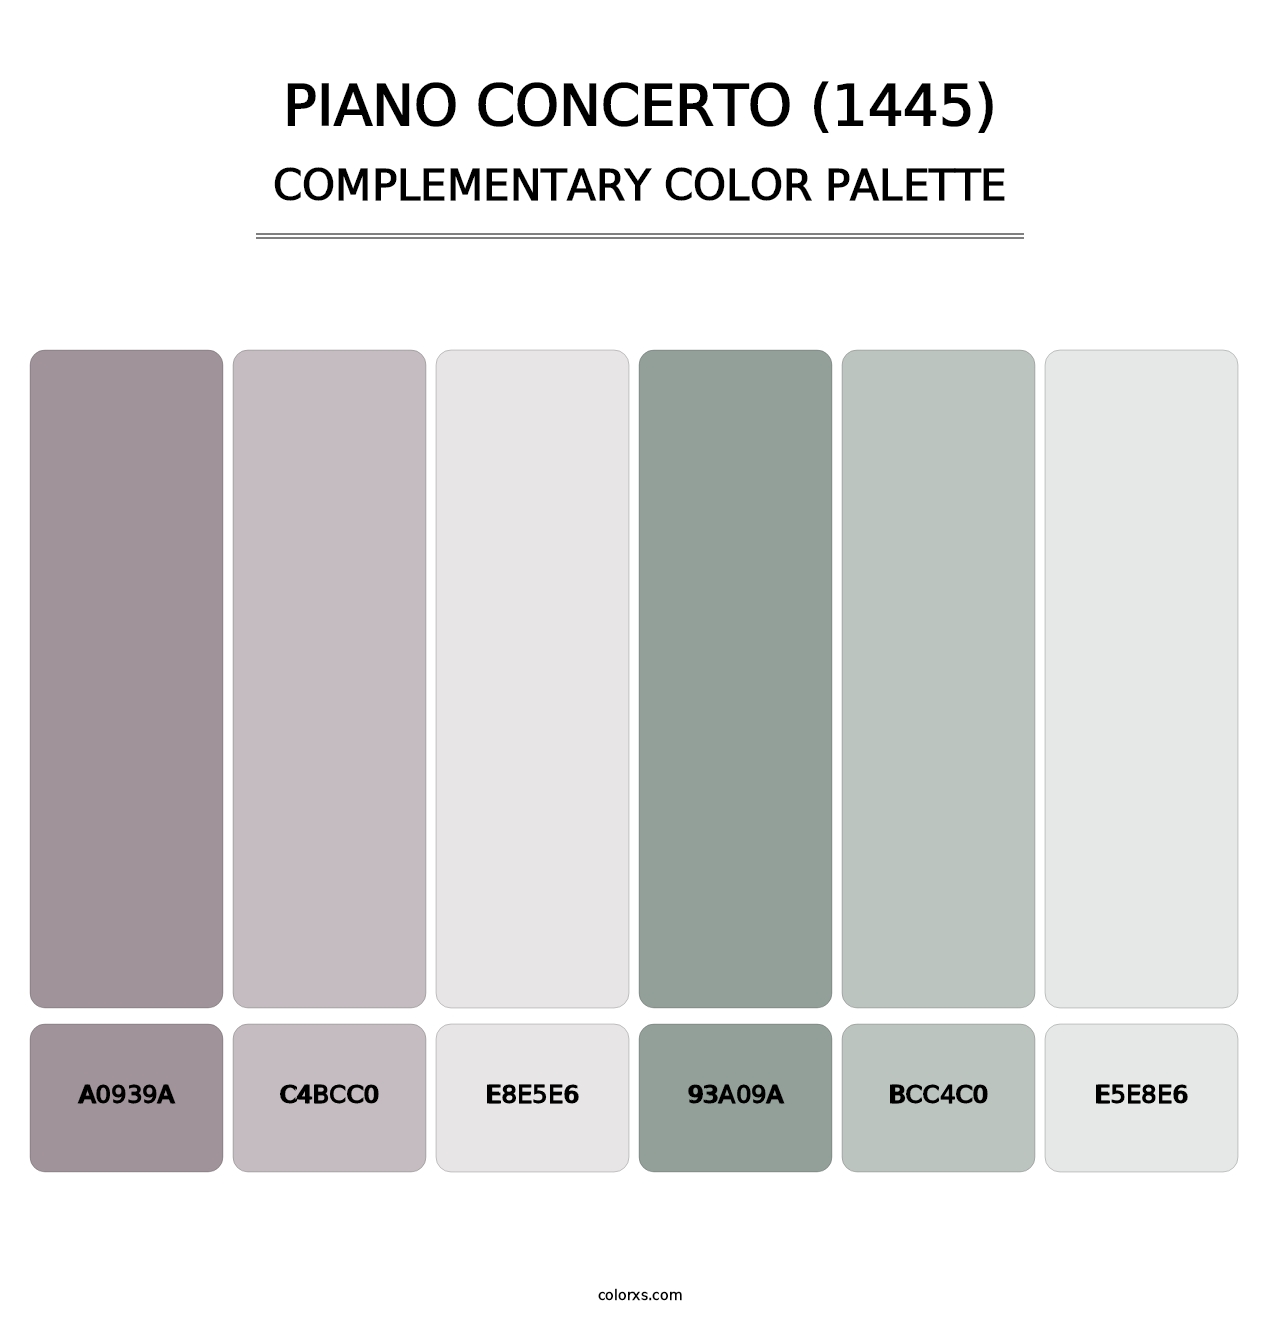 Piano Concerto (1445) - Complementary Color Palette